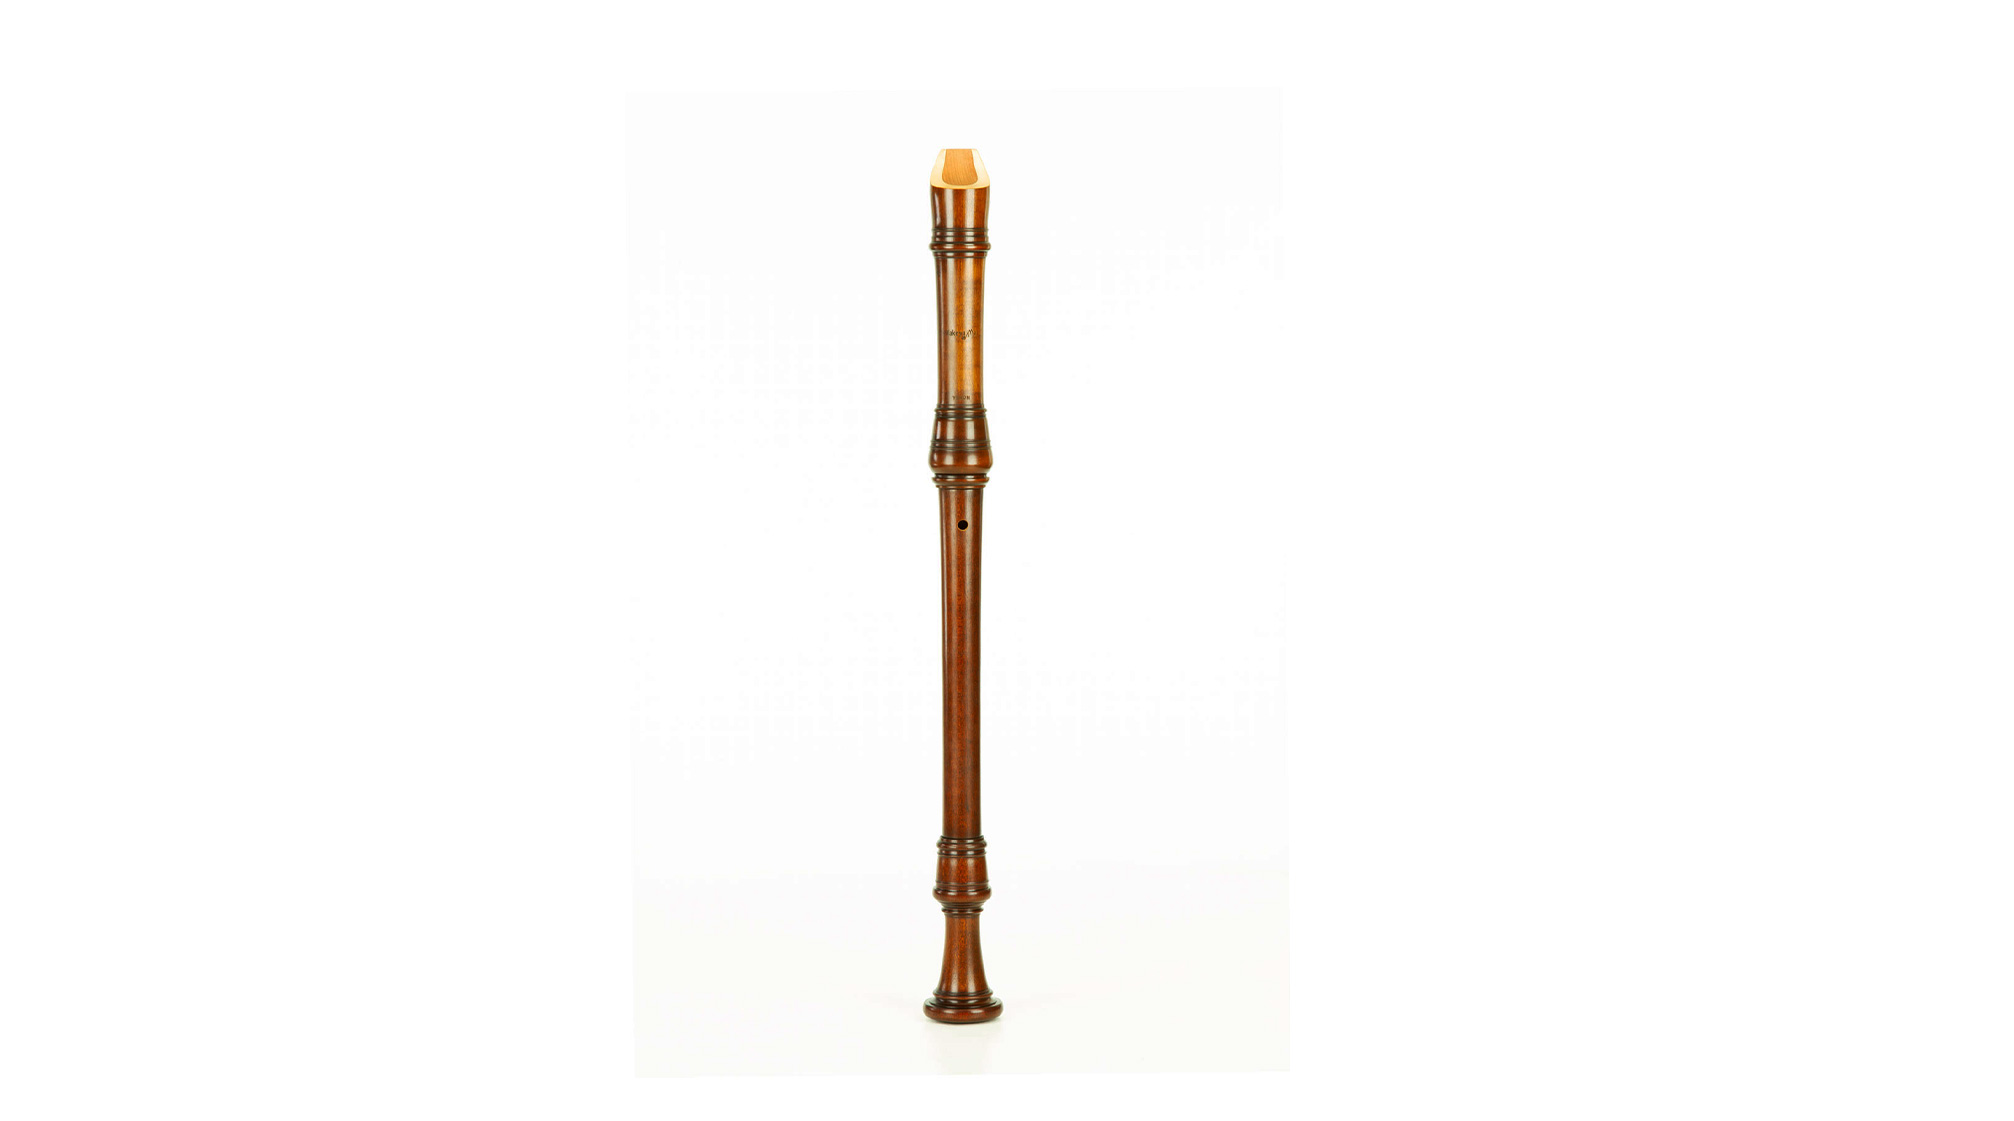 Takeyama, "Takeyama model", Voice Flute in d', baroque double hole, 415 Hz, Jap. maple stained